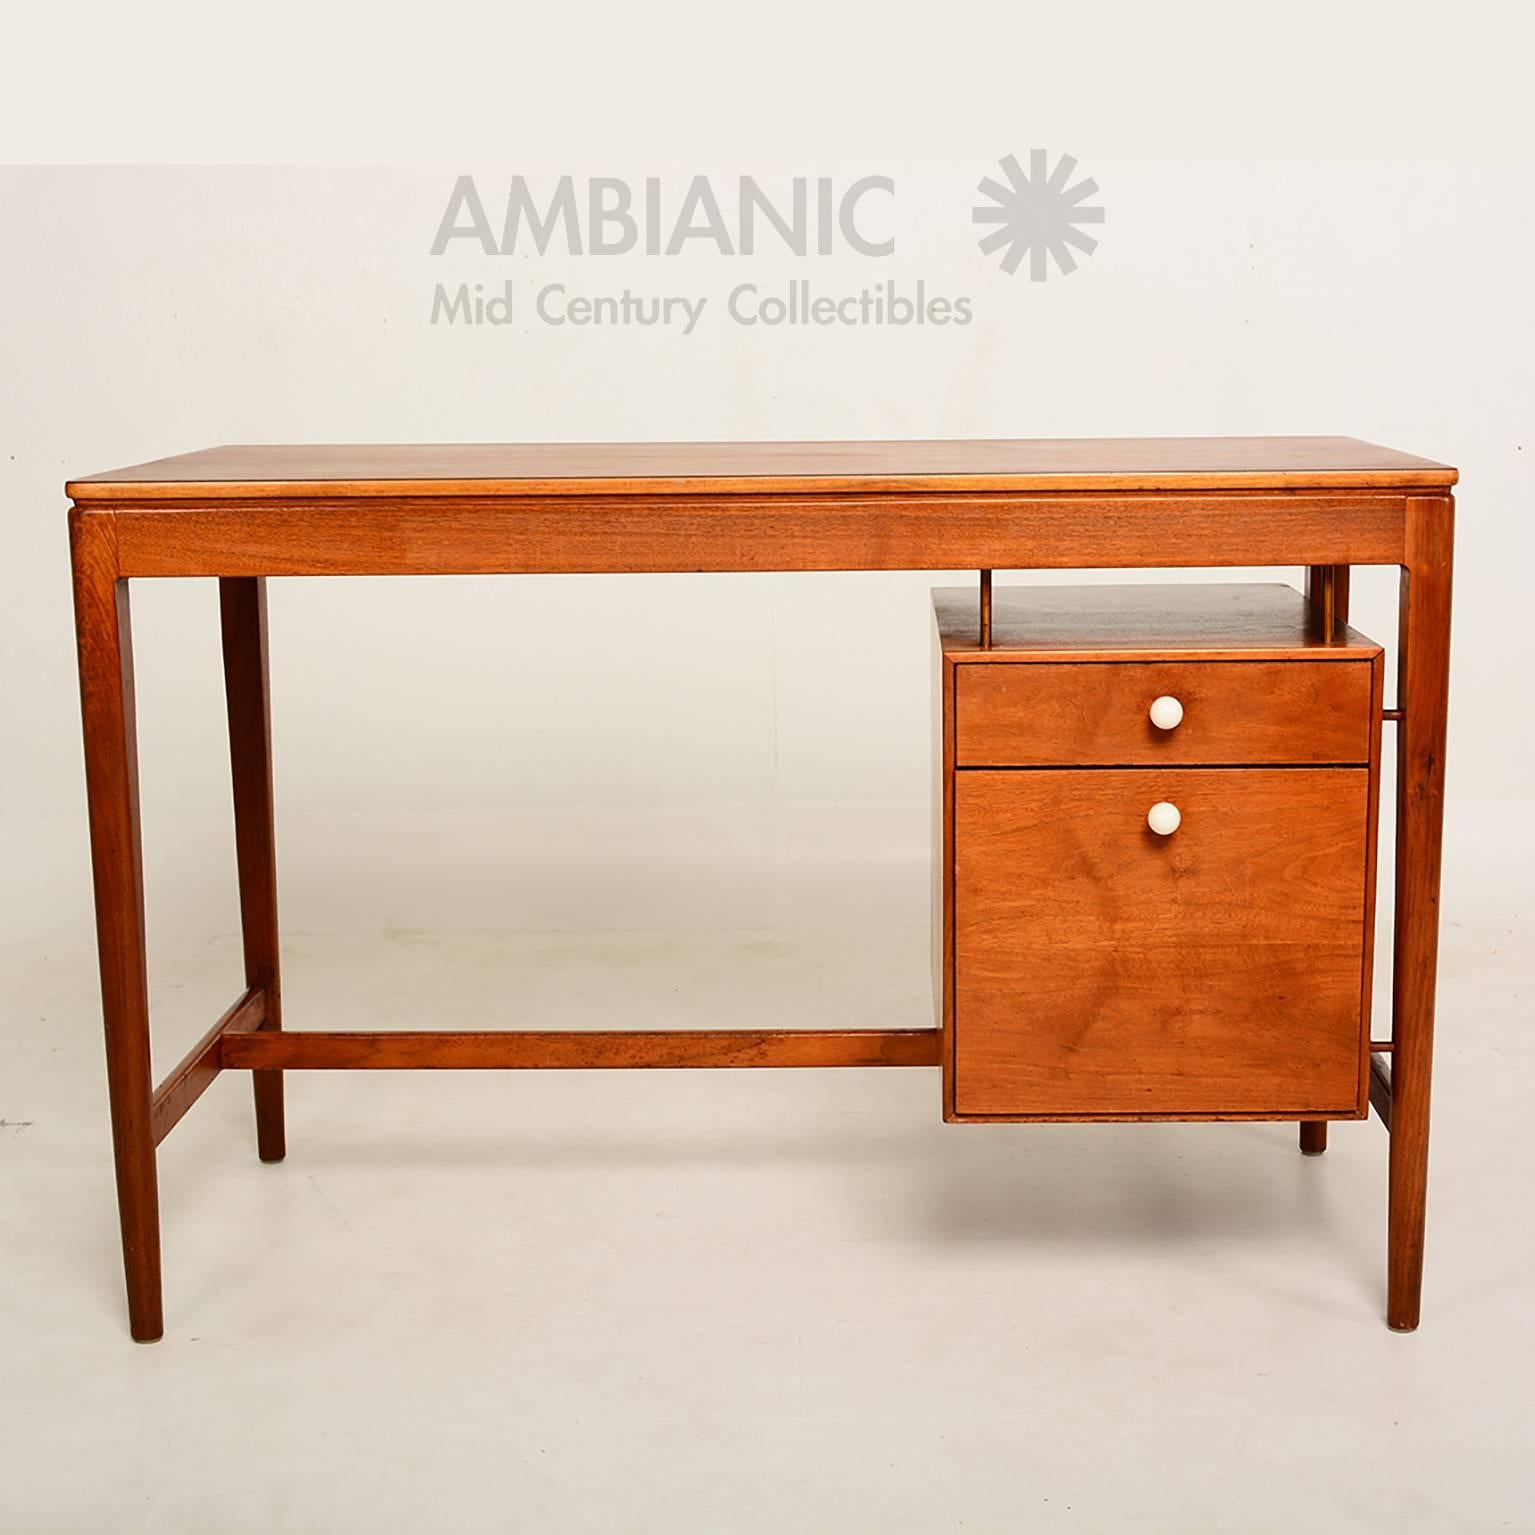 We are pleased to offer for your consideration a Mid century desk in Walnut wood by Drexel designed by Kipp Stewart

Walnut wood with two pull our drawers in the right side. Sculptural shape. 

Iconic ceramic pull handles. 

Dimensions:
29.25